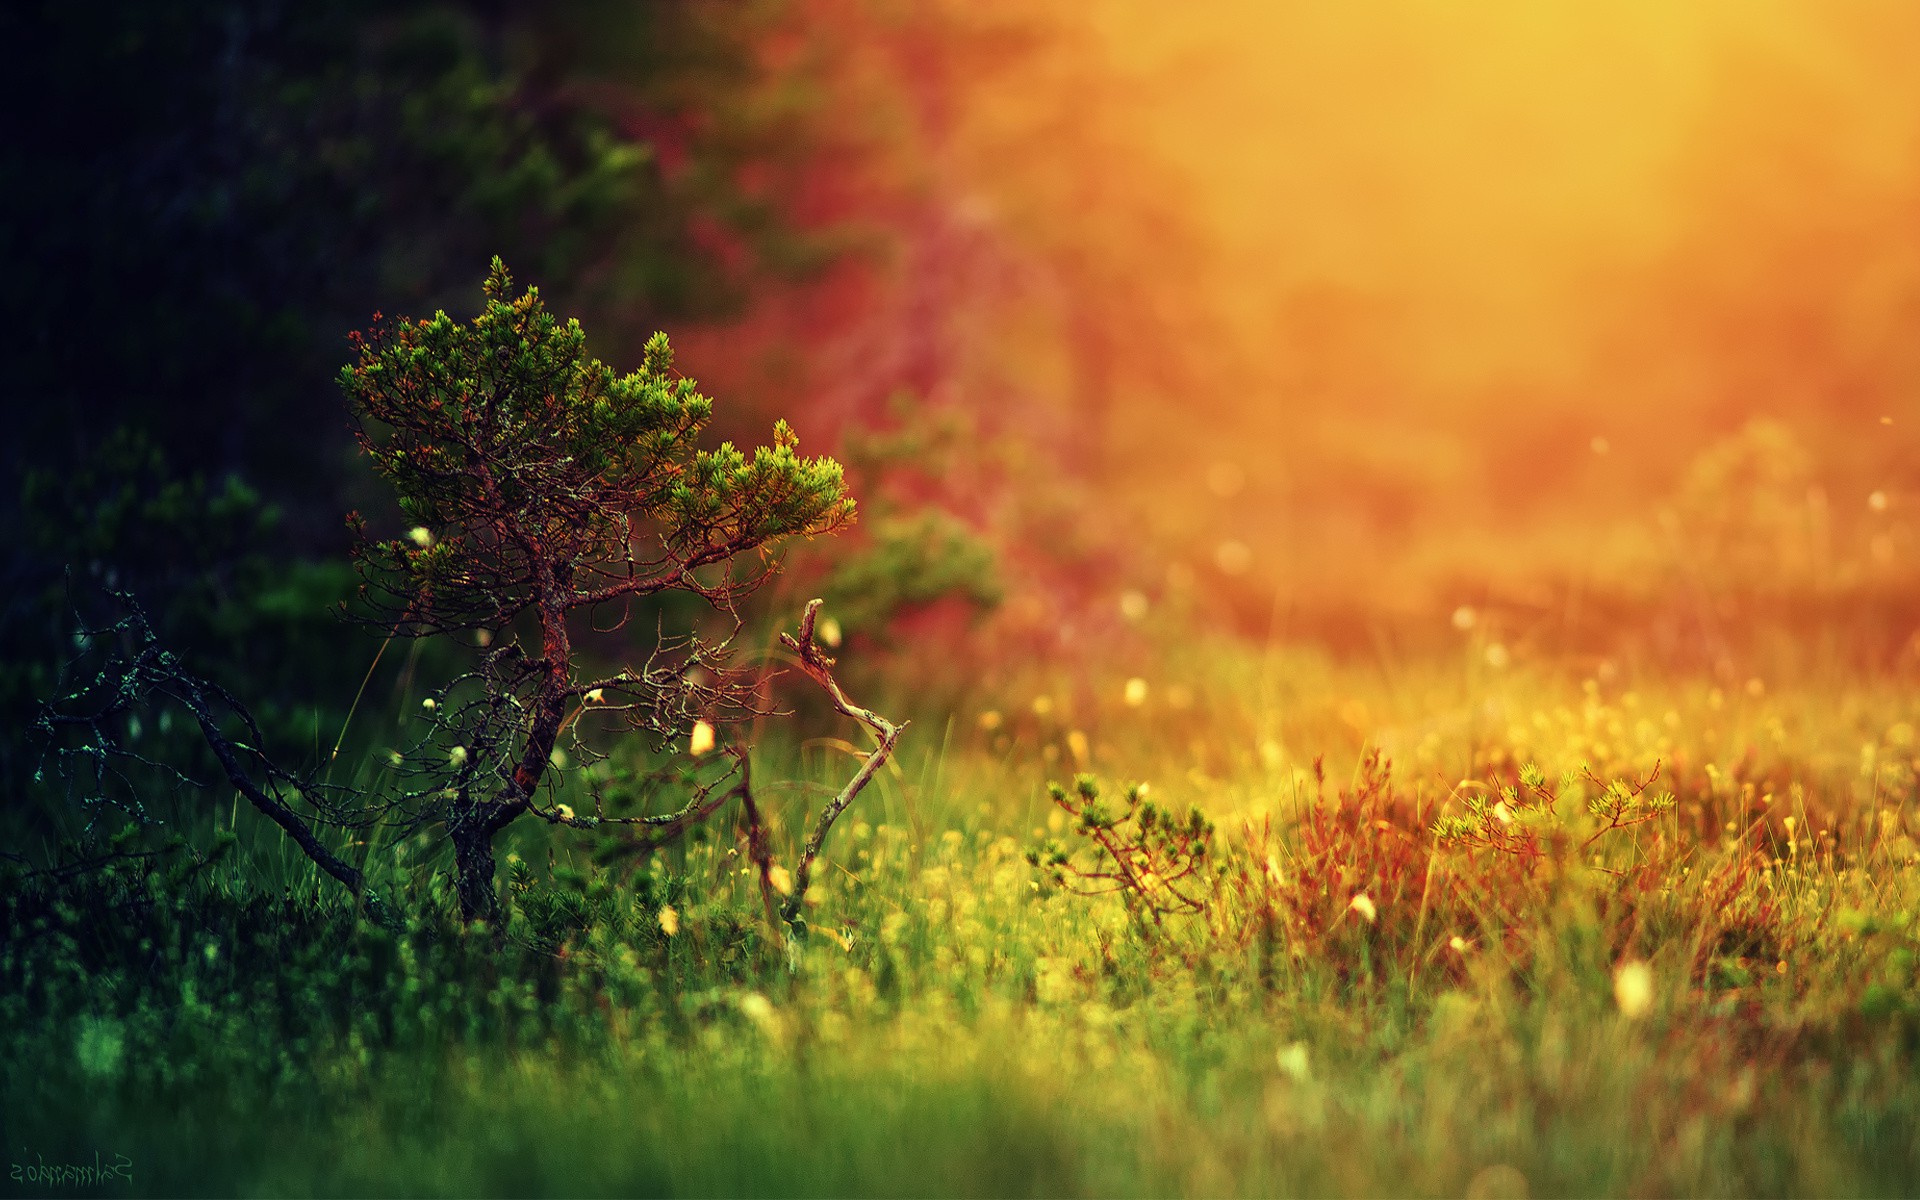 landscape, Depth Of Field, Grass, Blurred, Nature, Trees, Colorful